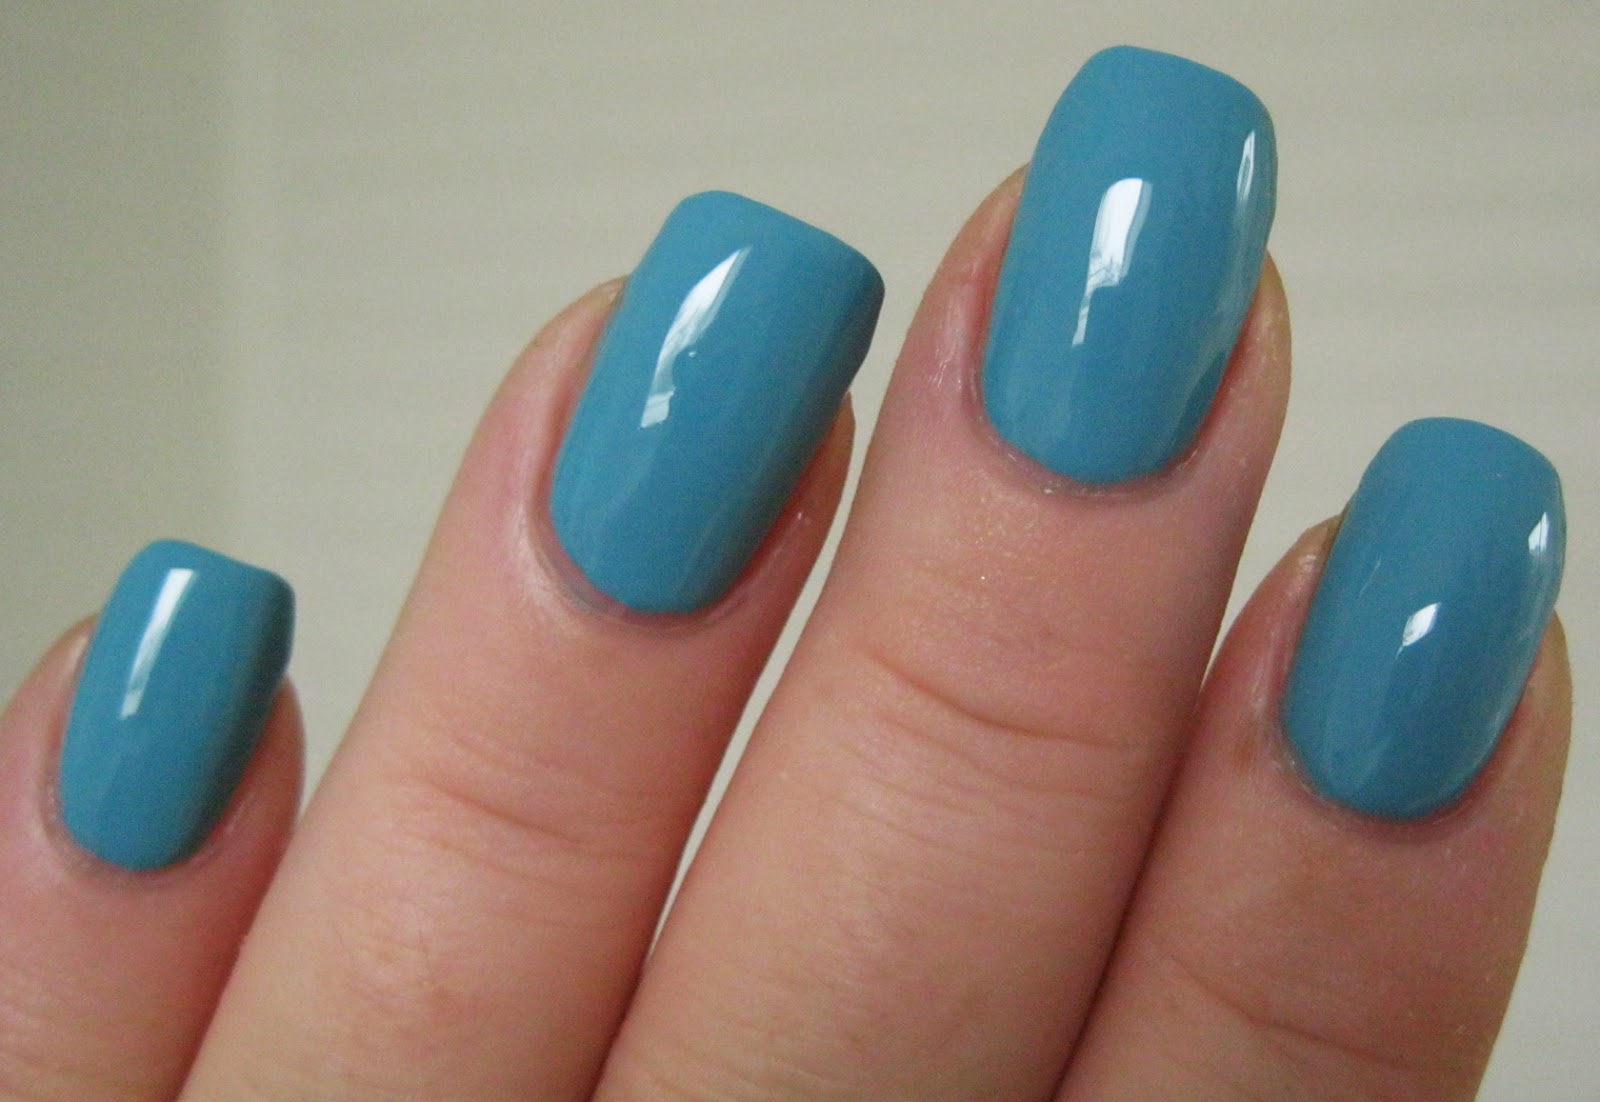 5. OPI Infinite Shine Nail Polish in "Can't Find My Czechbook" - wide 1